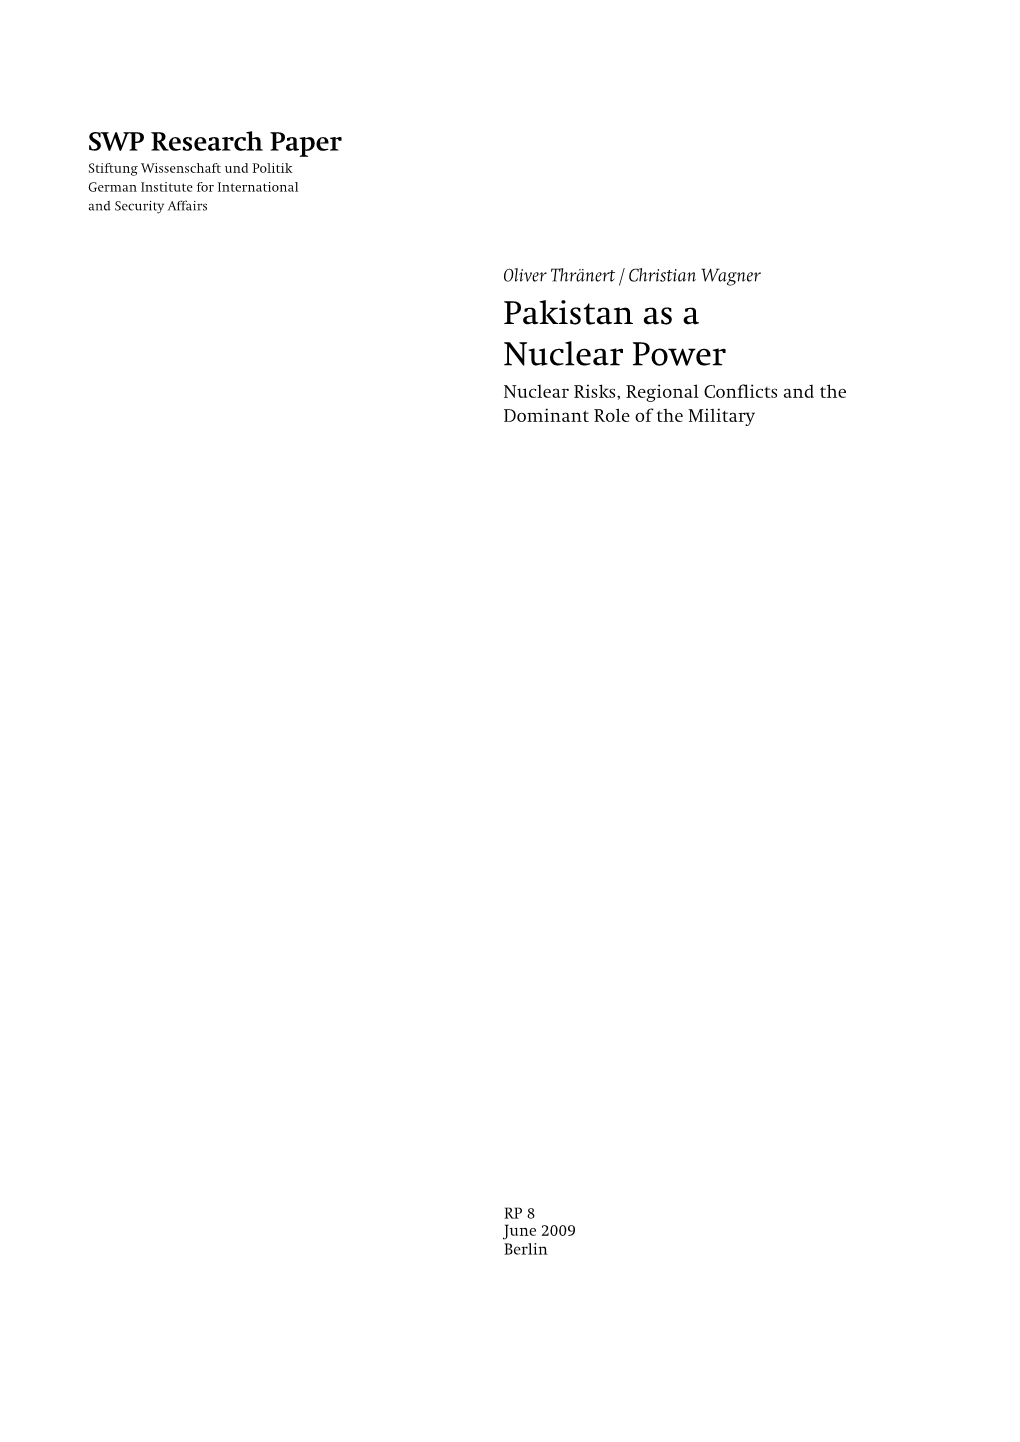 Pakistan As a Nuclear Power Nuclear Risks, Regional Conflicts and the Dominant Role of the Military